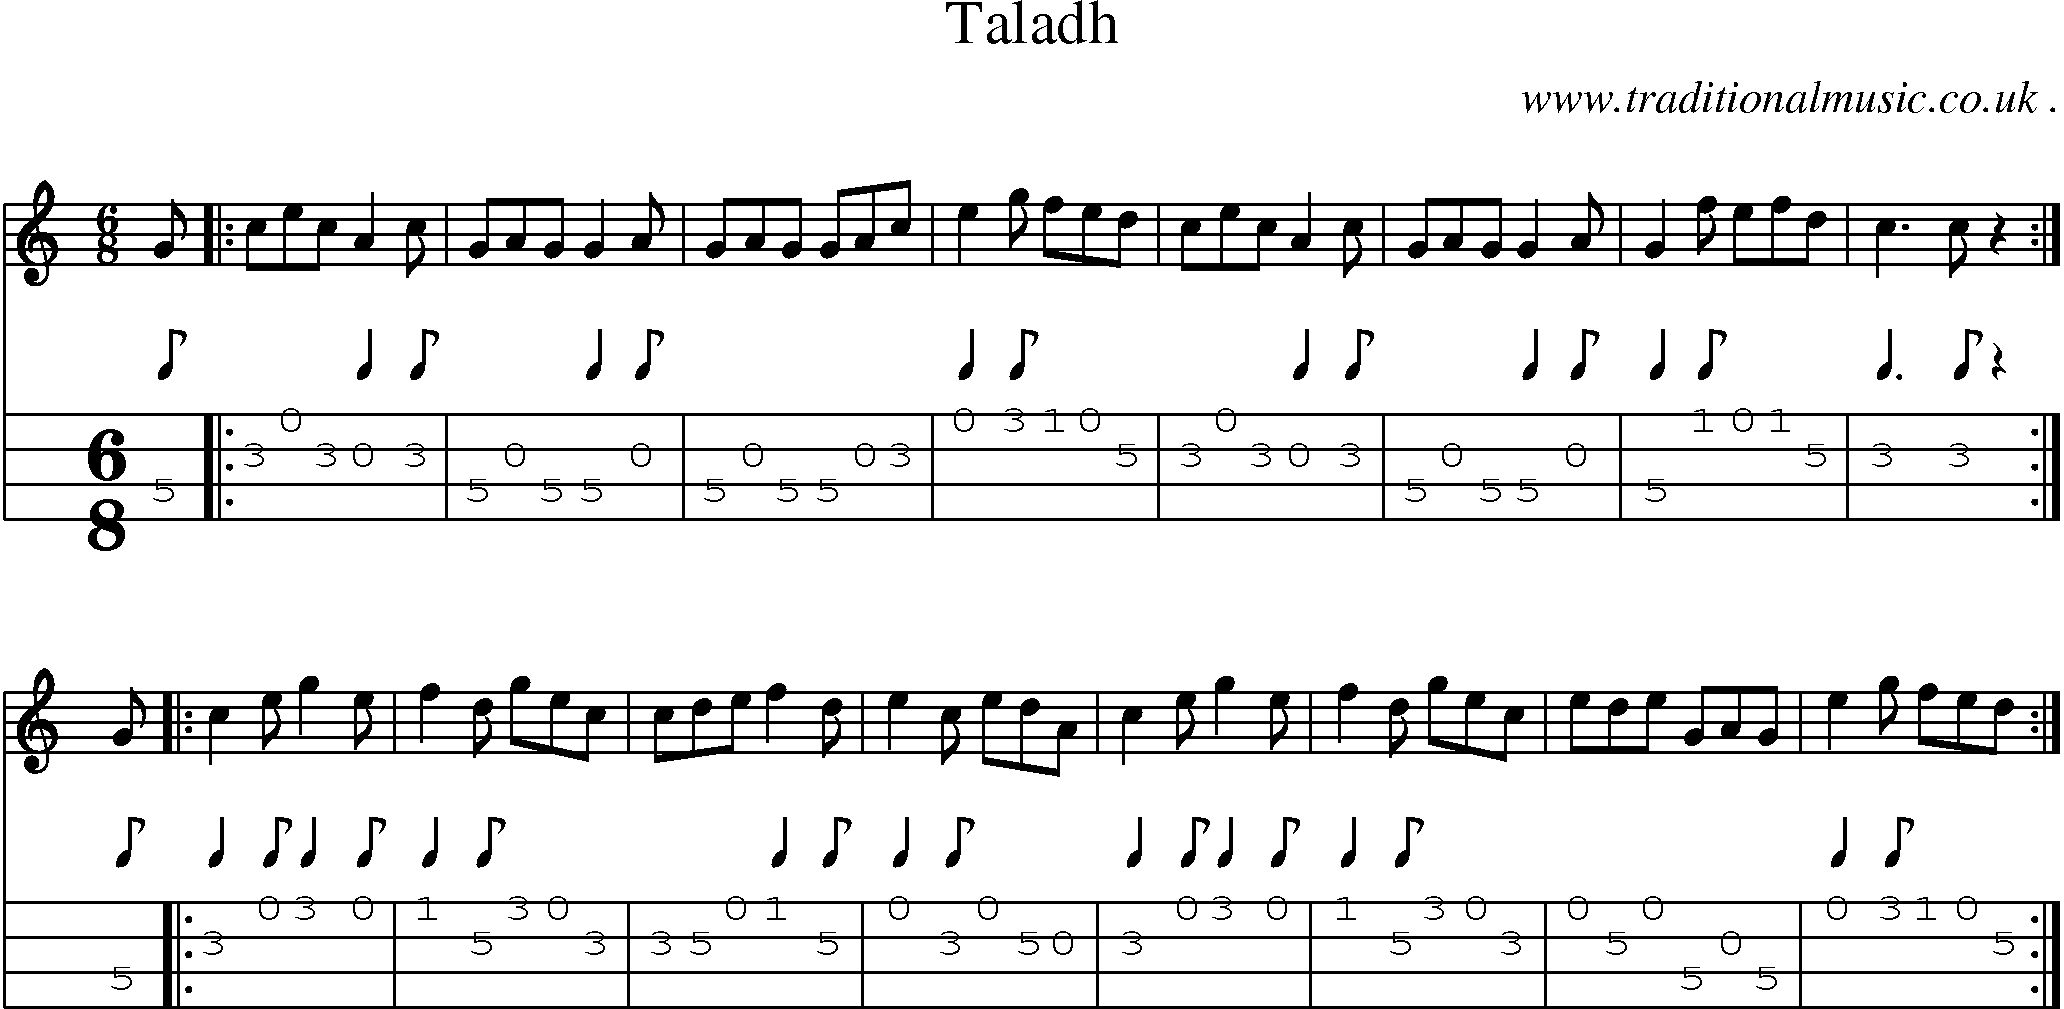 Sheet-music  score, Chords and Mandolin Tabs for Taladh